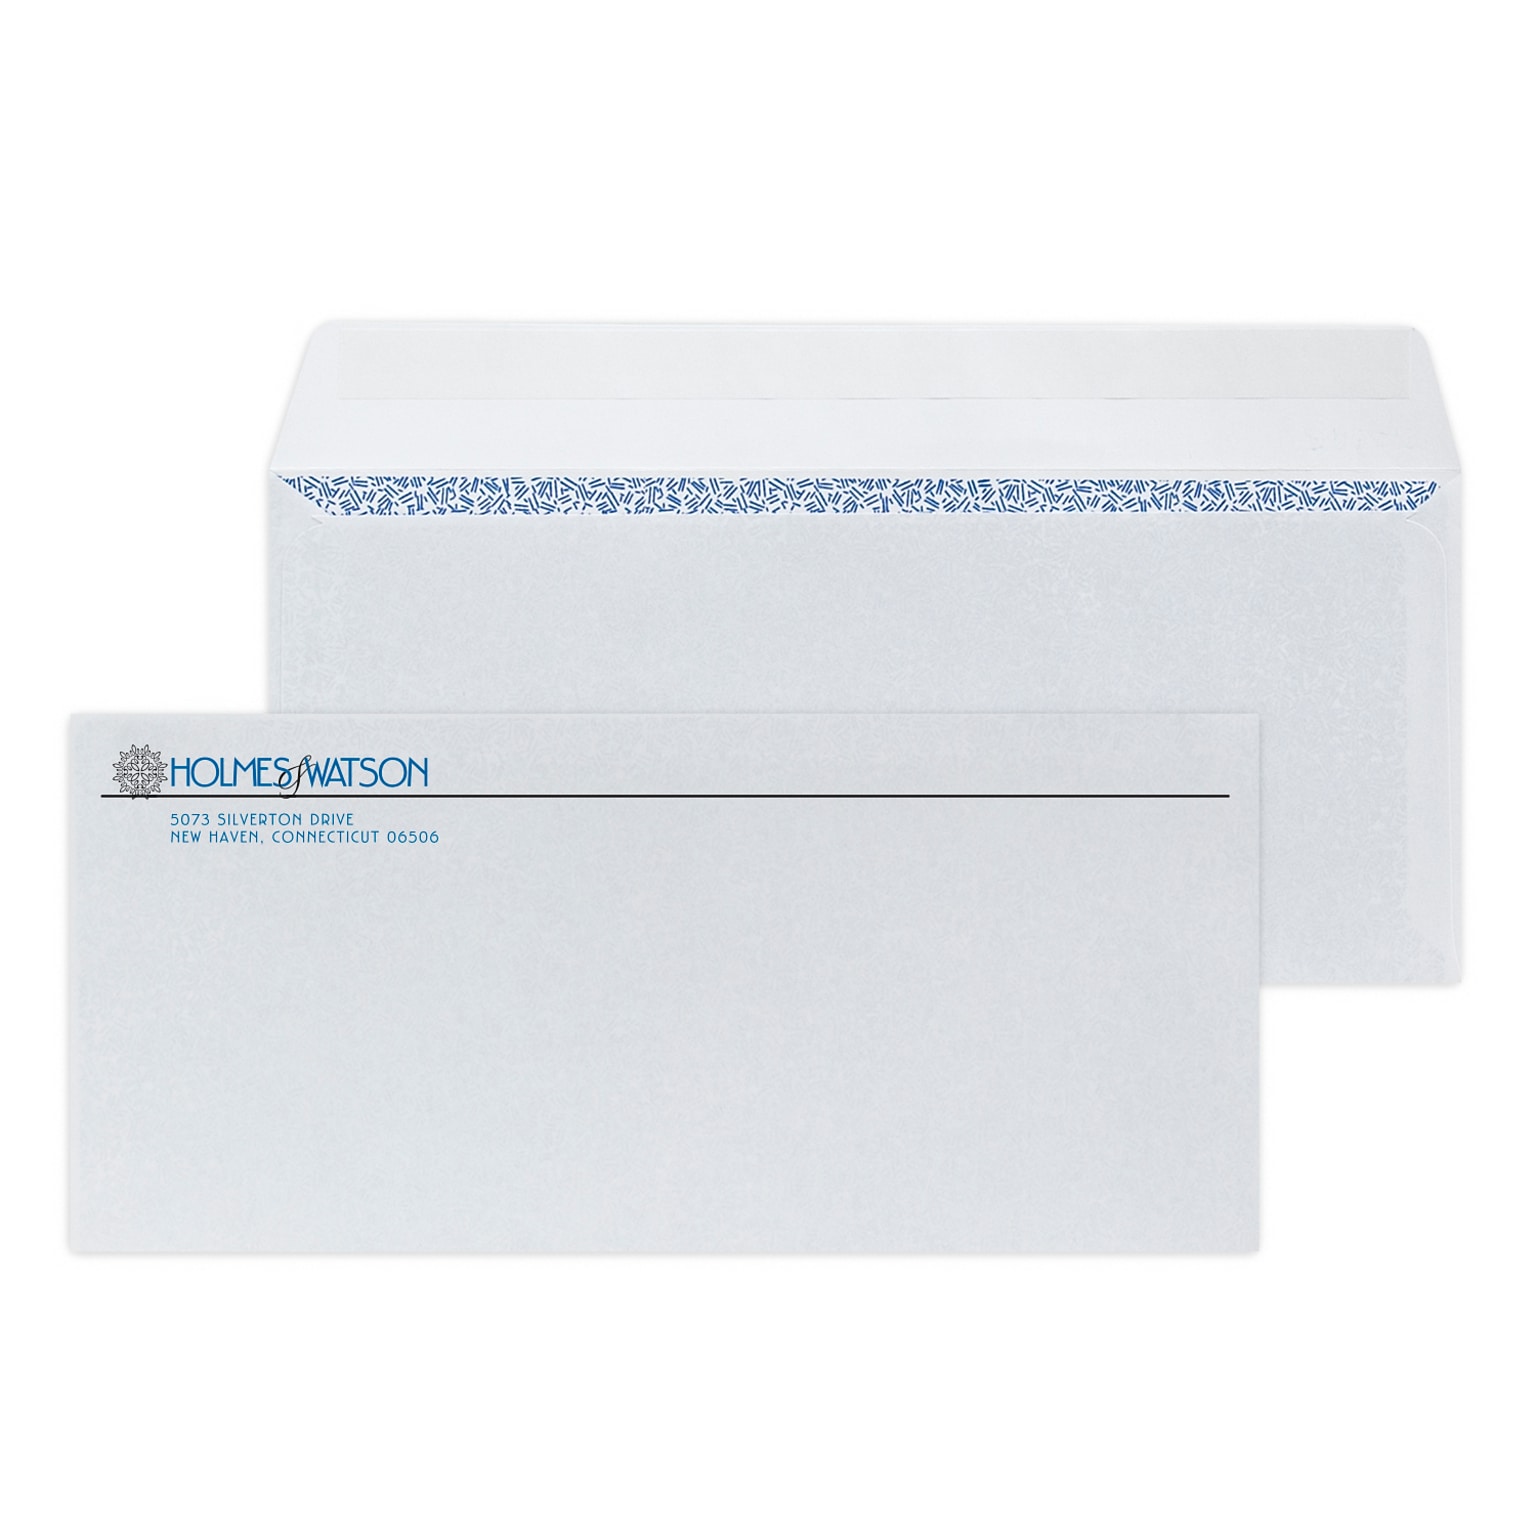 Custom #10 Peel and Seal Envelopes with Security Tint, 4 1/4 x 9 1/2, 24# White Wove, 2 Standard Inks, 250 / Pack